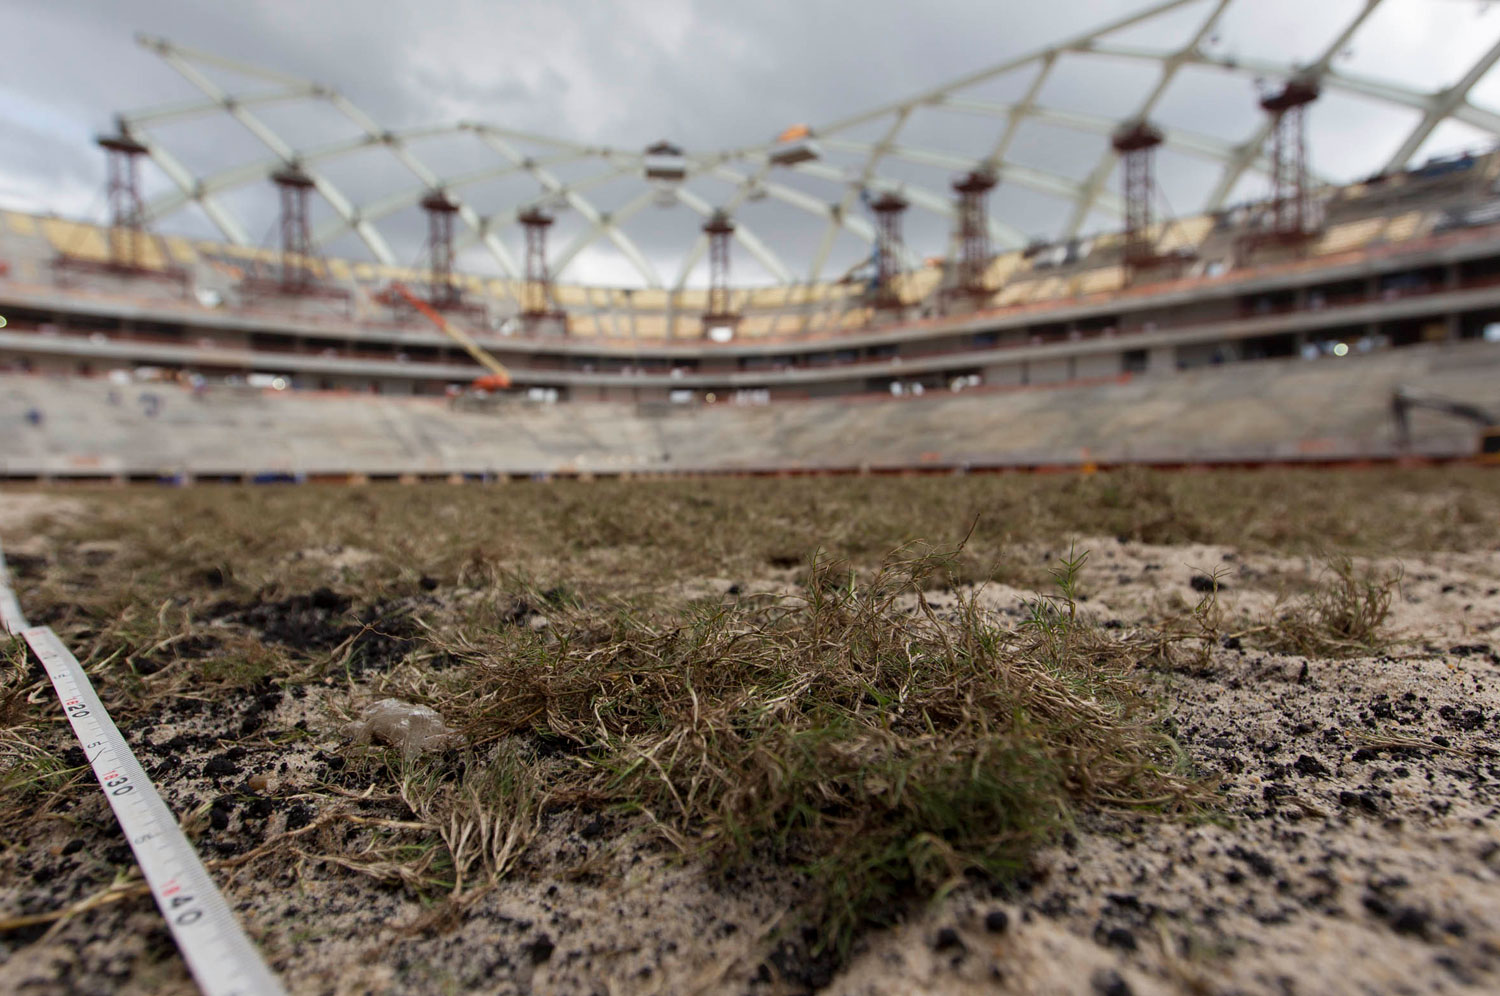 Brazil’s World Cup Will Kick the Environment in the Teeth